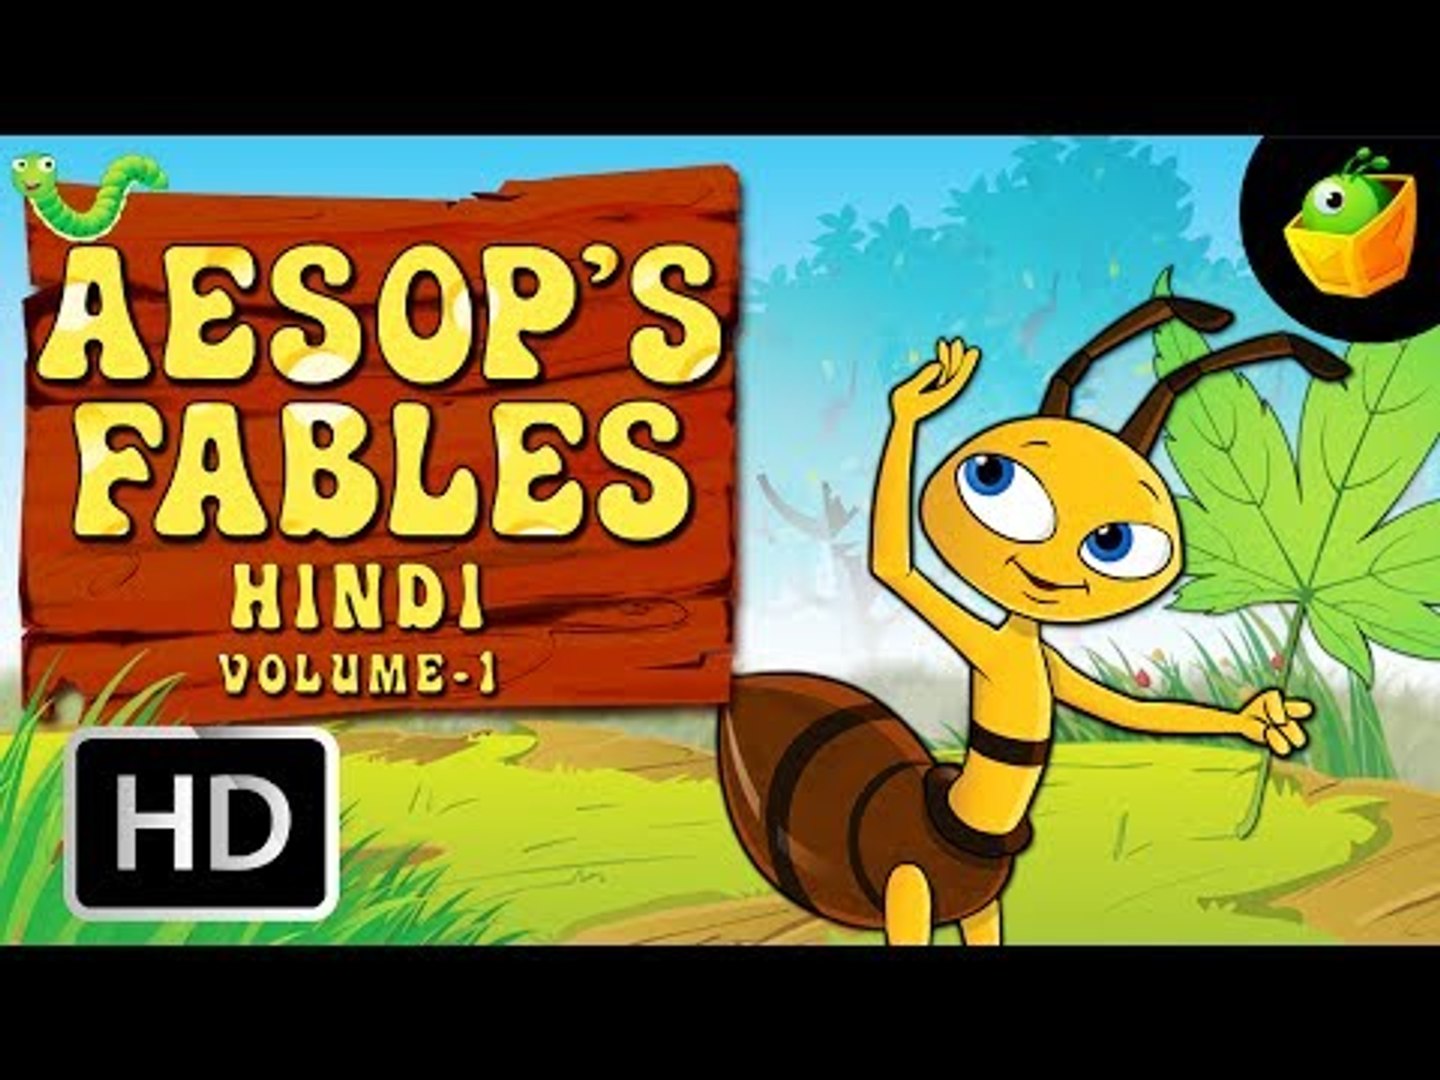 Aesop's Fables Full Stories Vol 1 In Hindi (HD) - Compilation of Cartoon/ Animated Stories For Kids - video Dailymotion